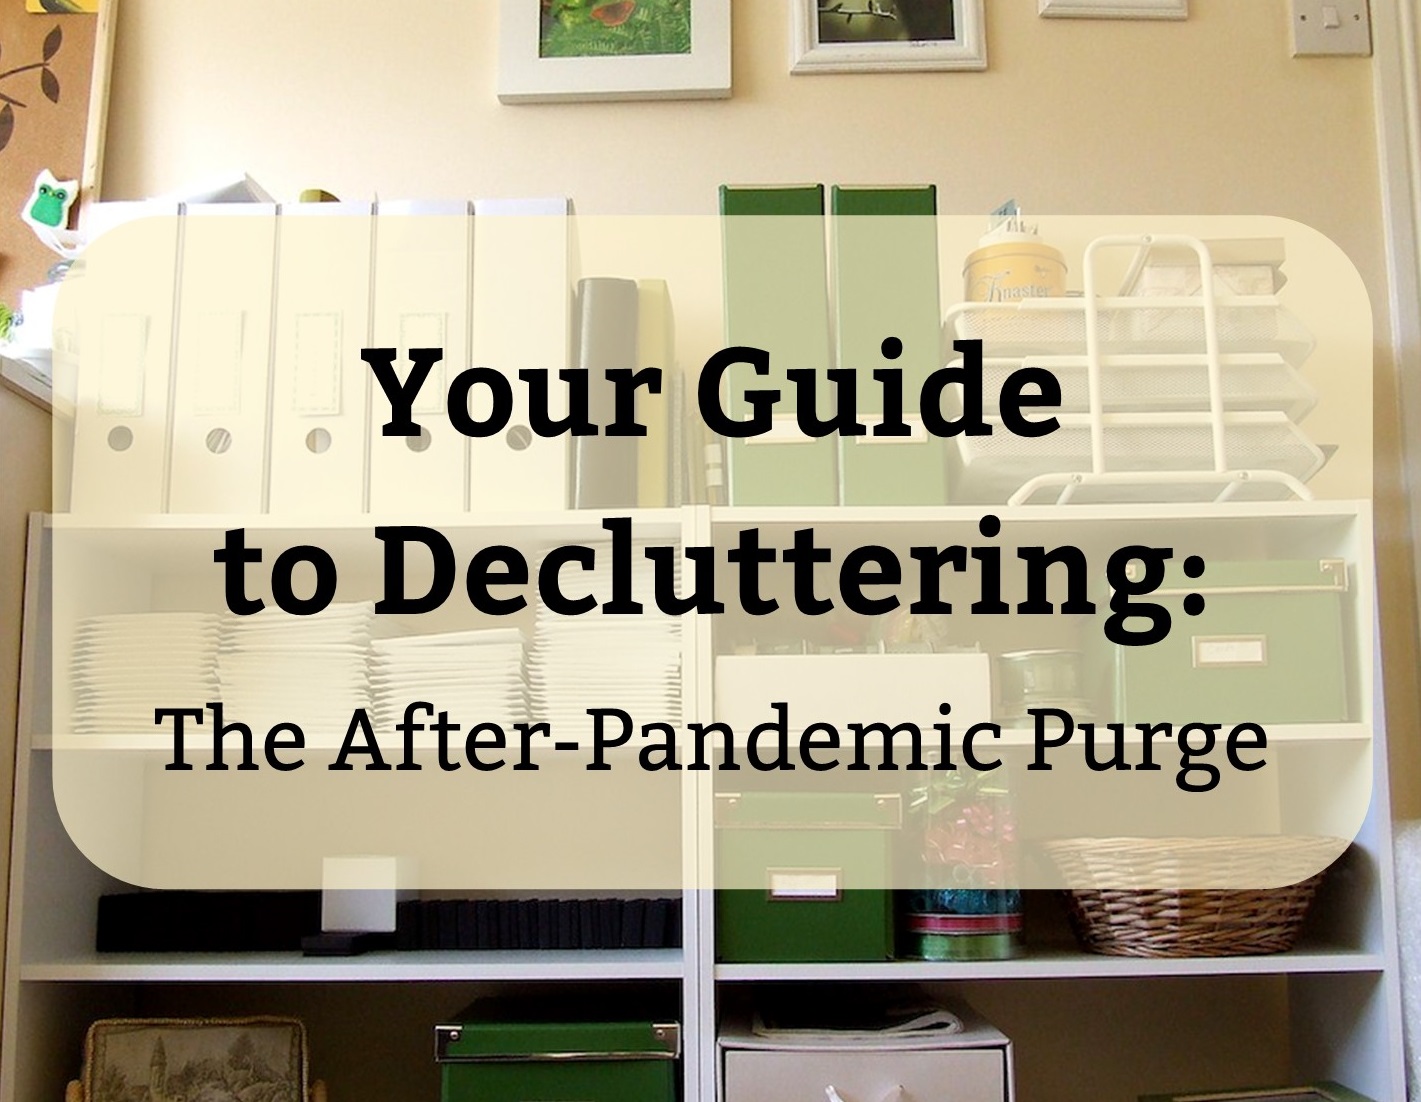 Your Guide to Decluttering: The After-Pandemic Purge